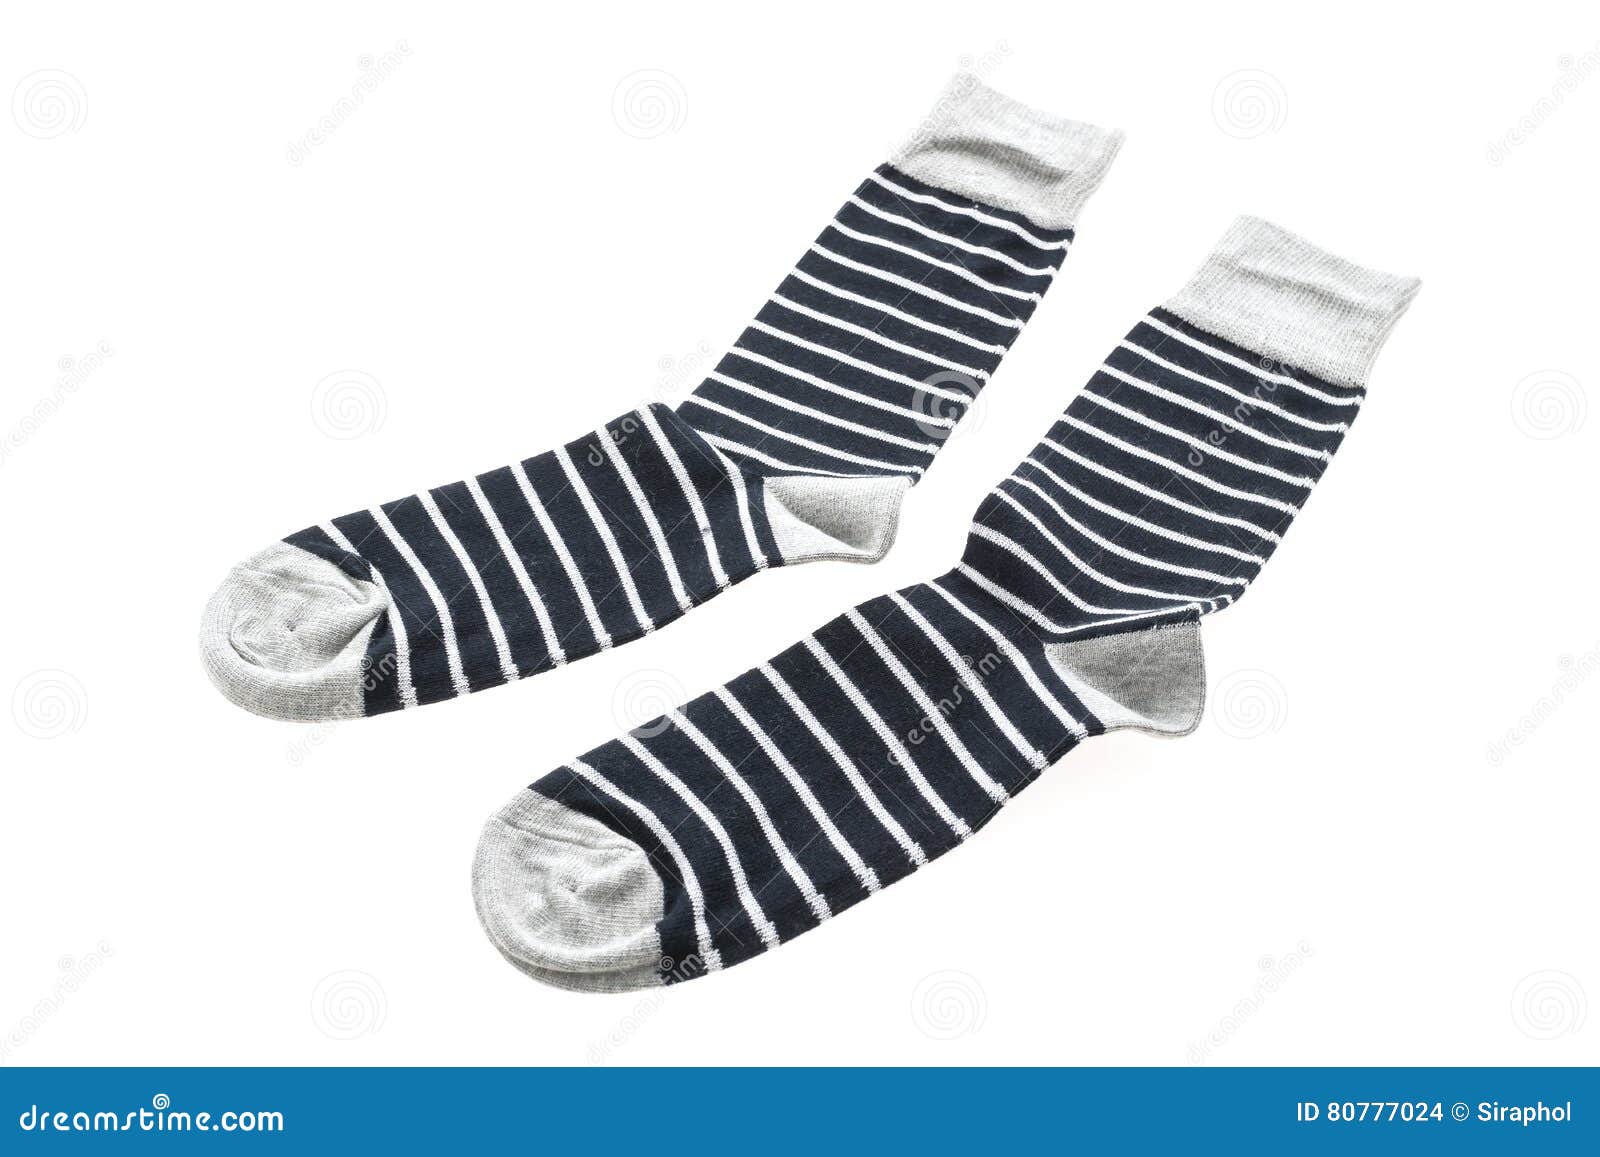 Sock isolated stock photo. Image of background, color - 80777024